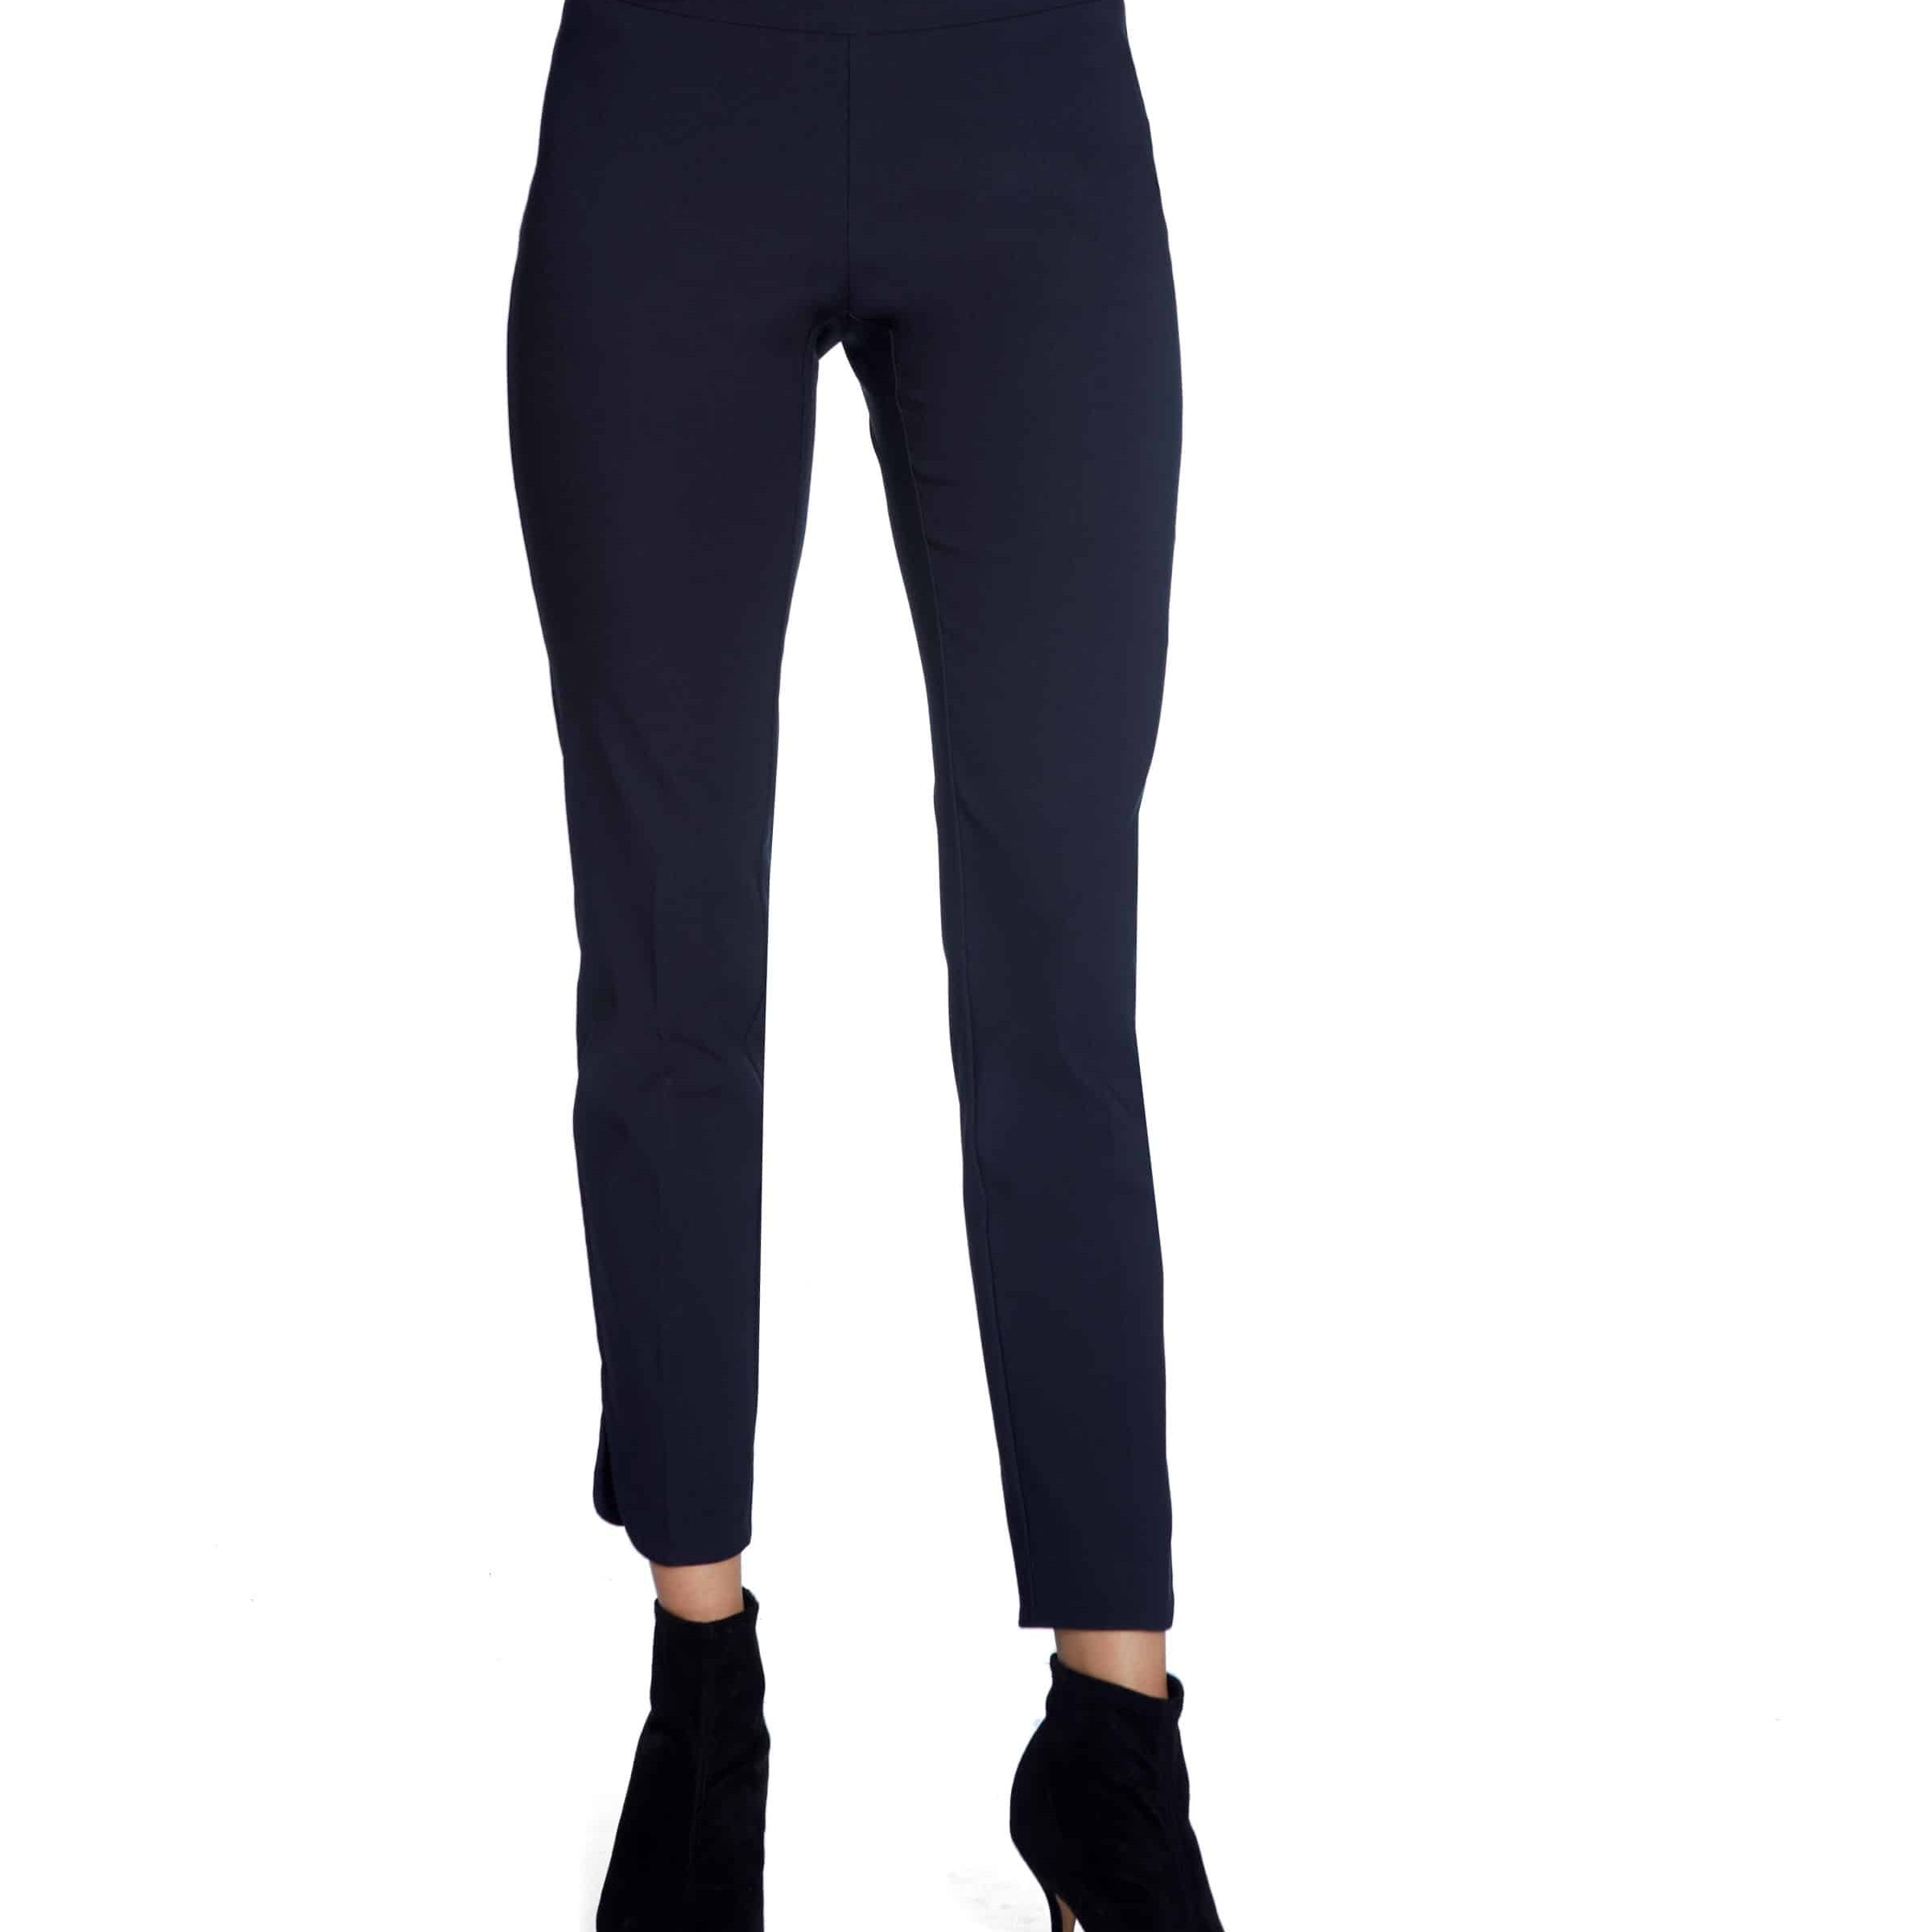 UP! Women's Pants Navy / 6 Solid Slim Ankle Pant